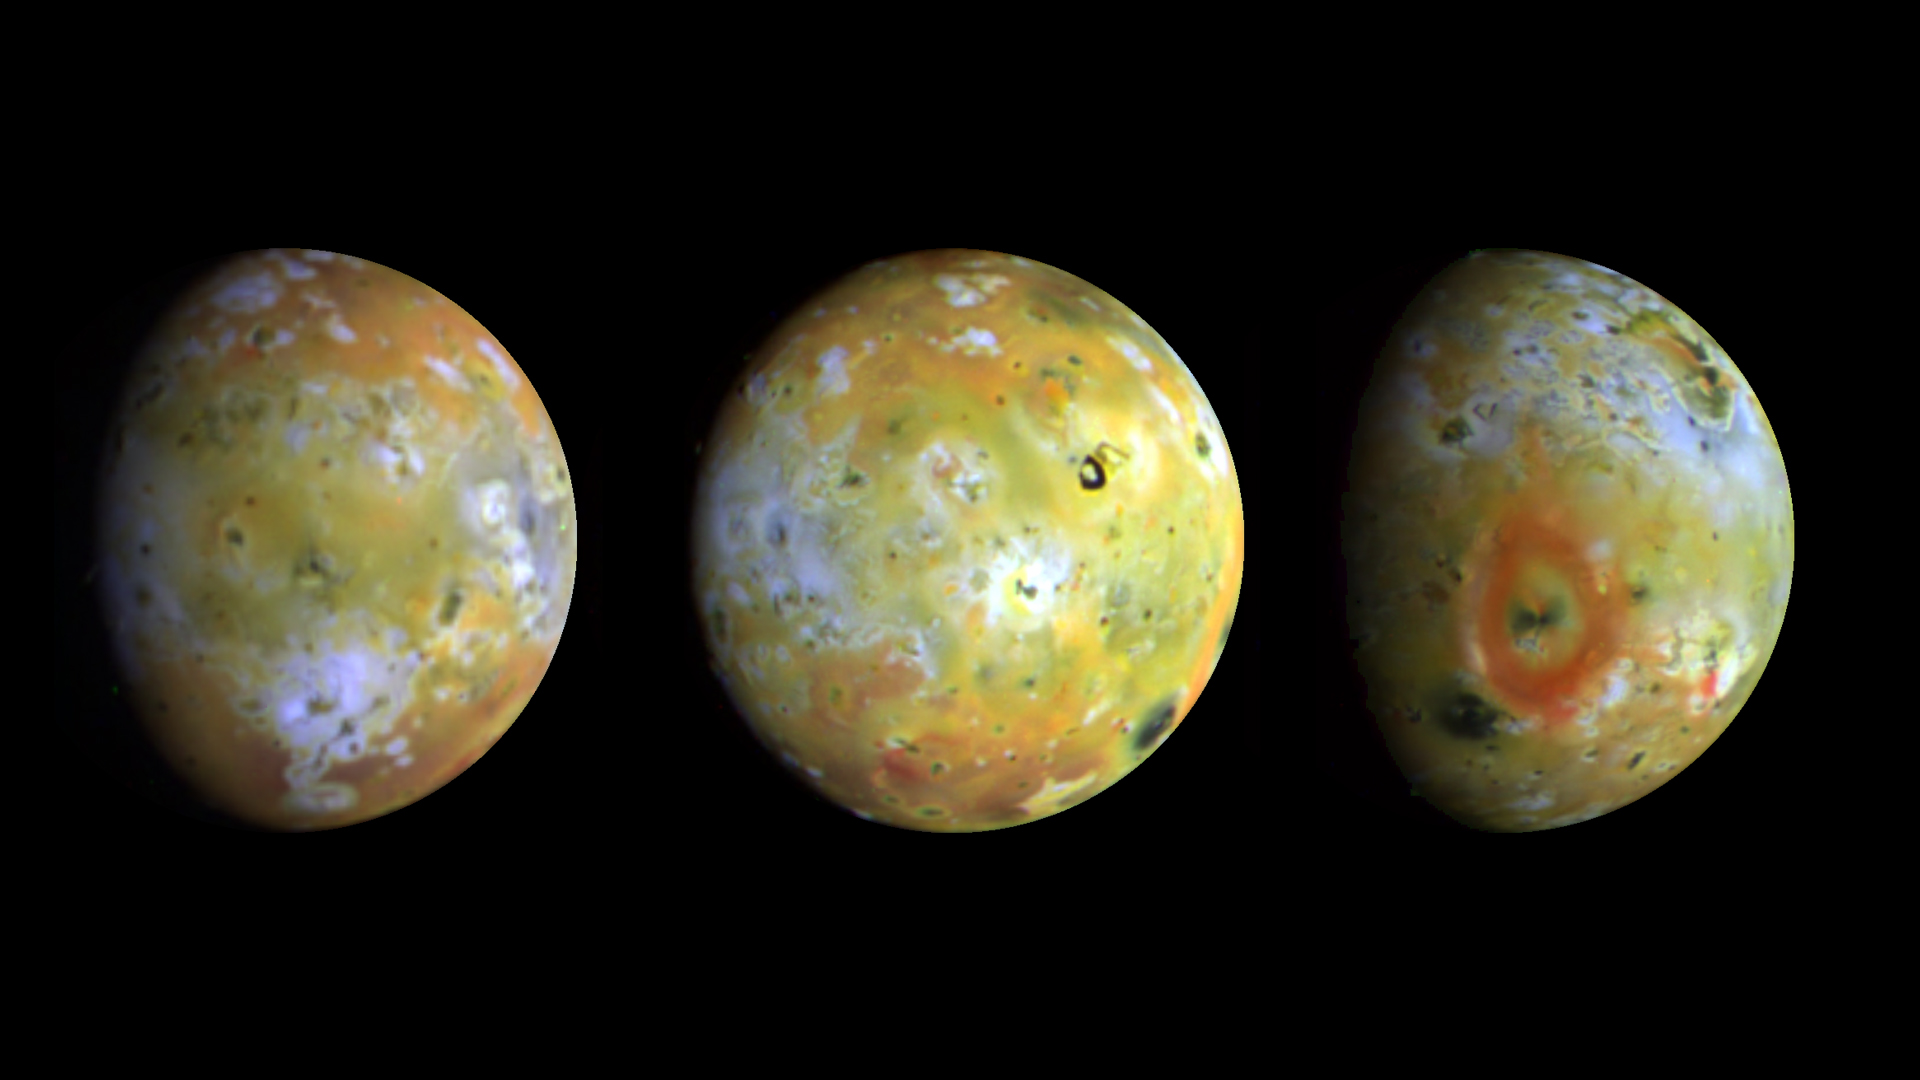 Io is the most volcanically active body in the solar system. At 2,263 miles in diameter, it is slightly larger than Earth’s moon.